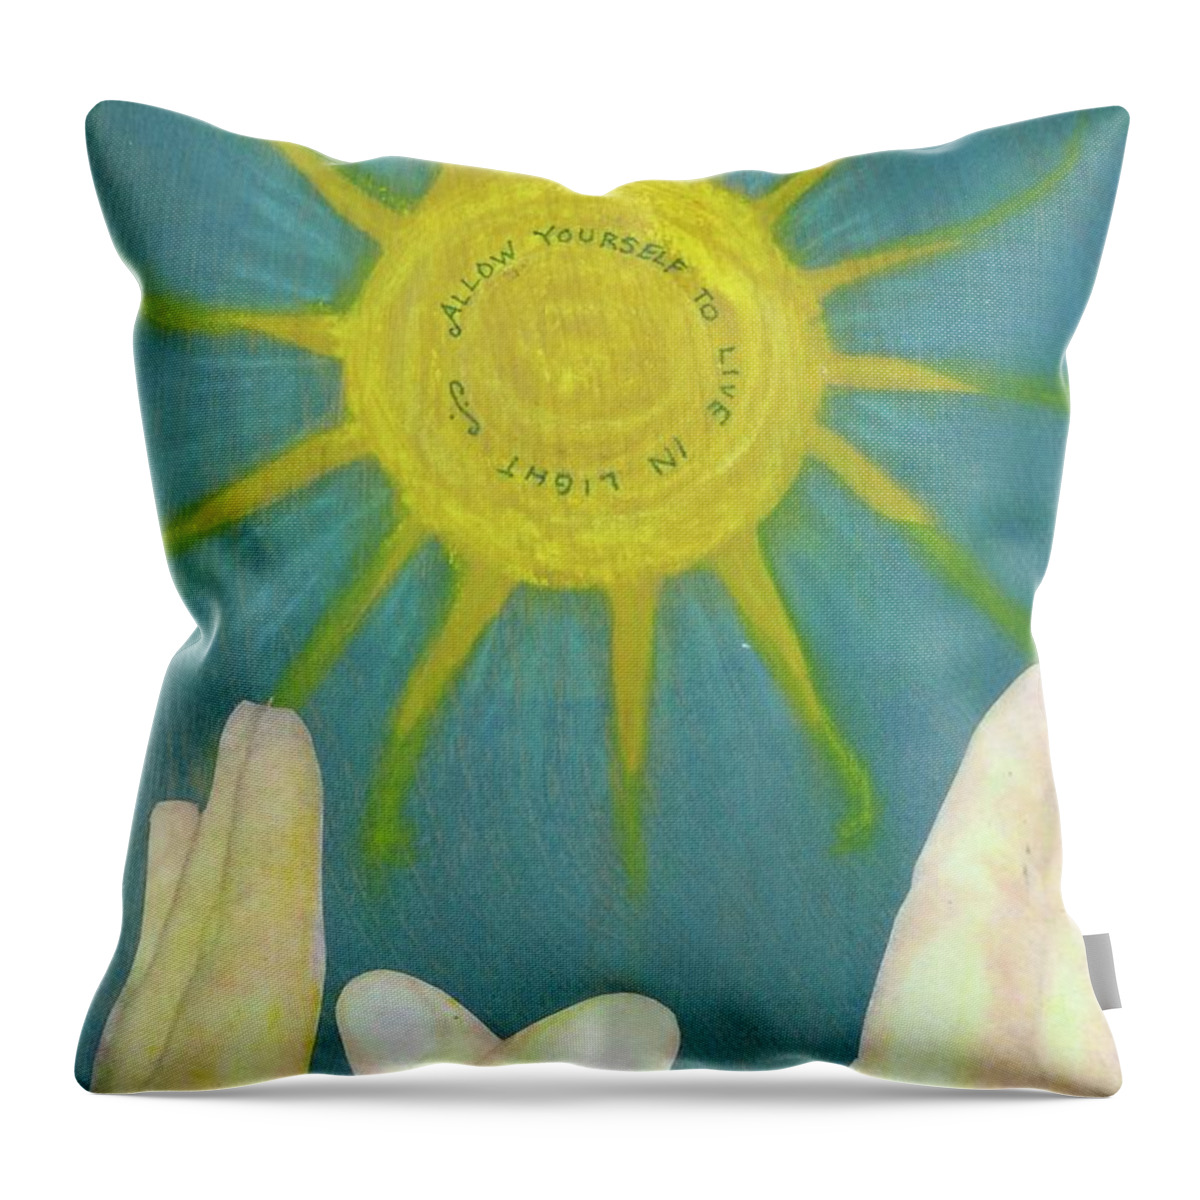 New Age Throw Pillow featuring the mixed media Live In Light by Desiree Paquette